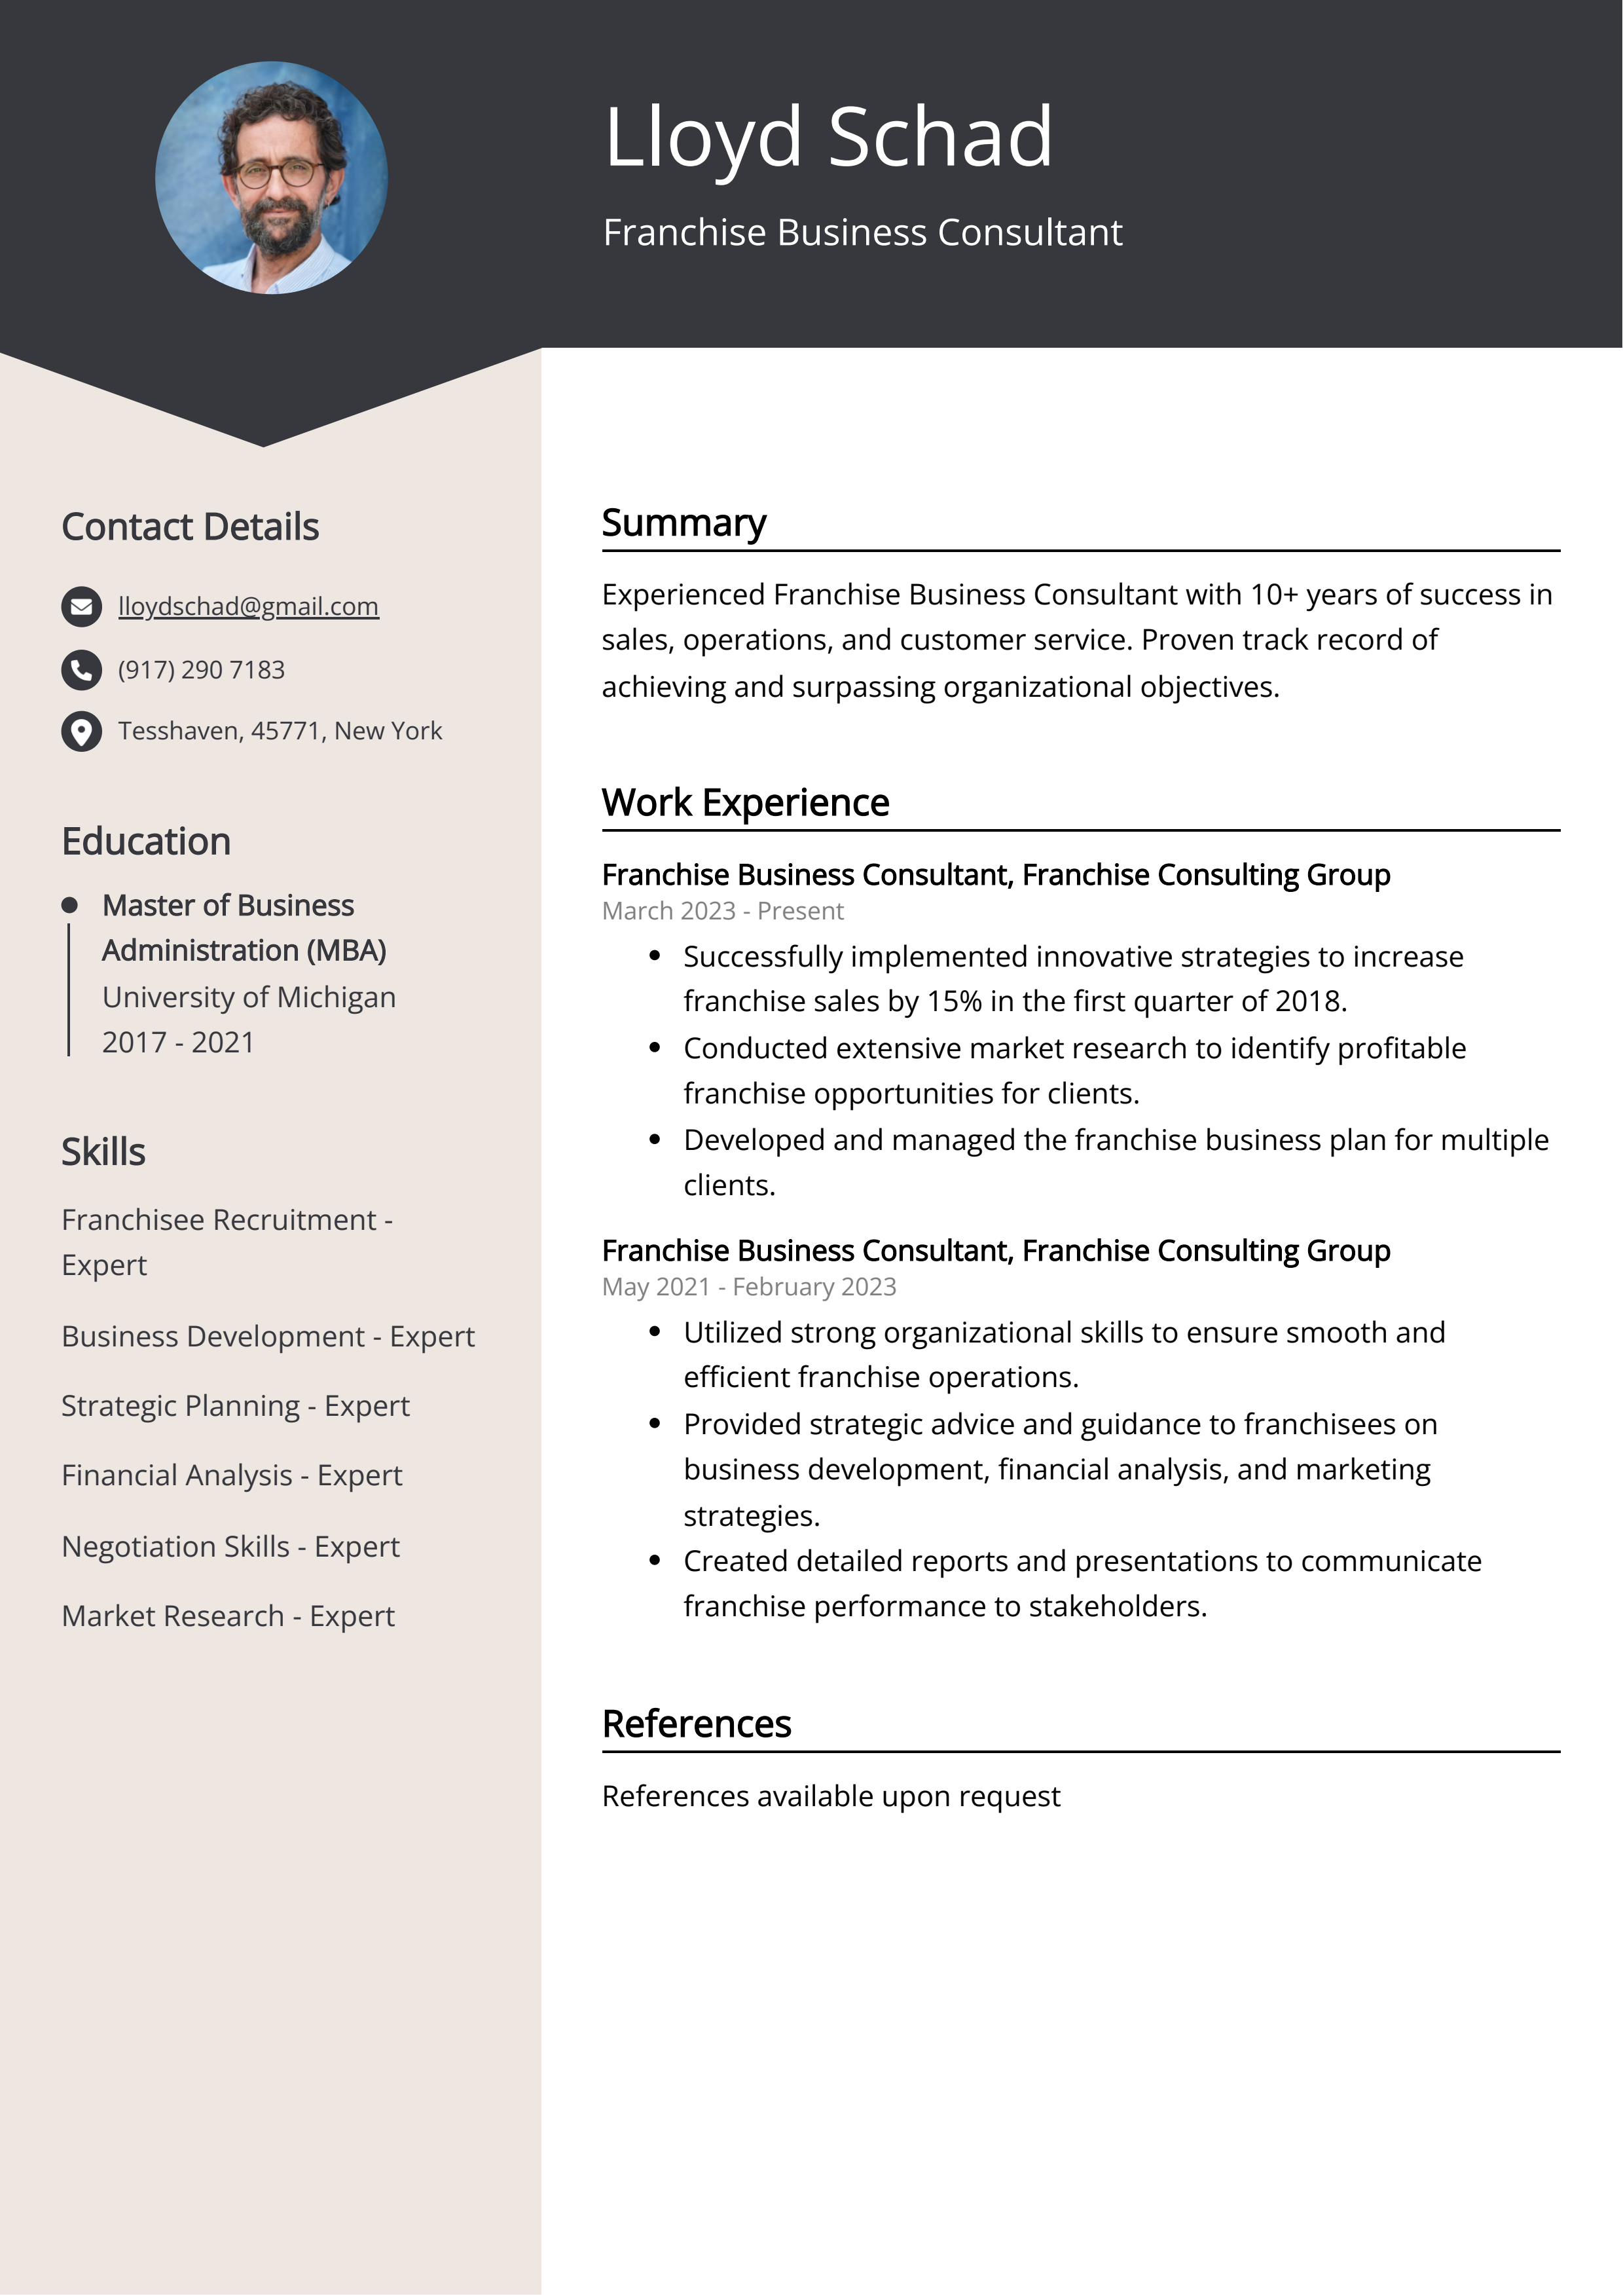 Franchise Business Consultant CV Example